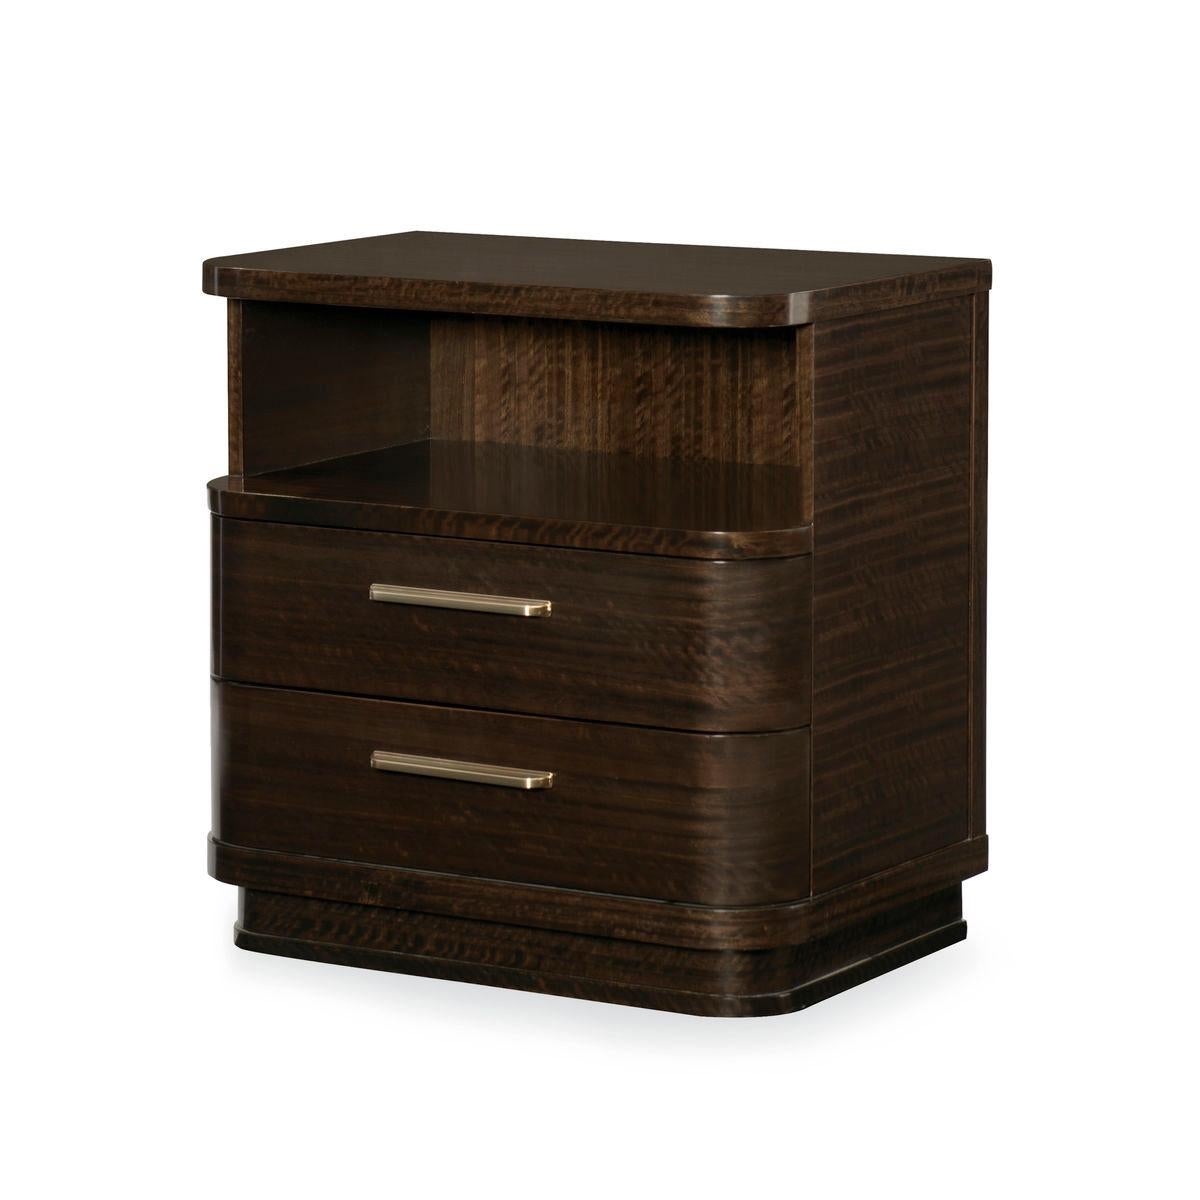 Dark and handsome, this modern nightstand hints at throw-back designs from the 1940s. Sporting rounded corners, a solid recessed plinth base and retro-era metal hardware, this nightstand has an open compartment with wire access through the shelf and